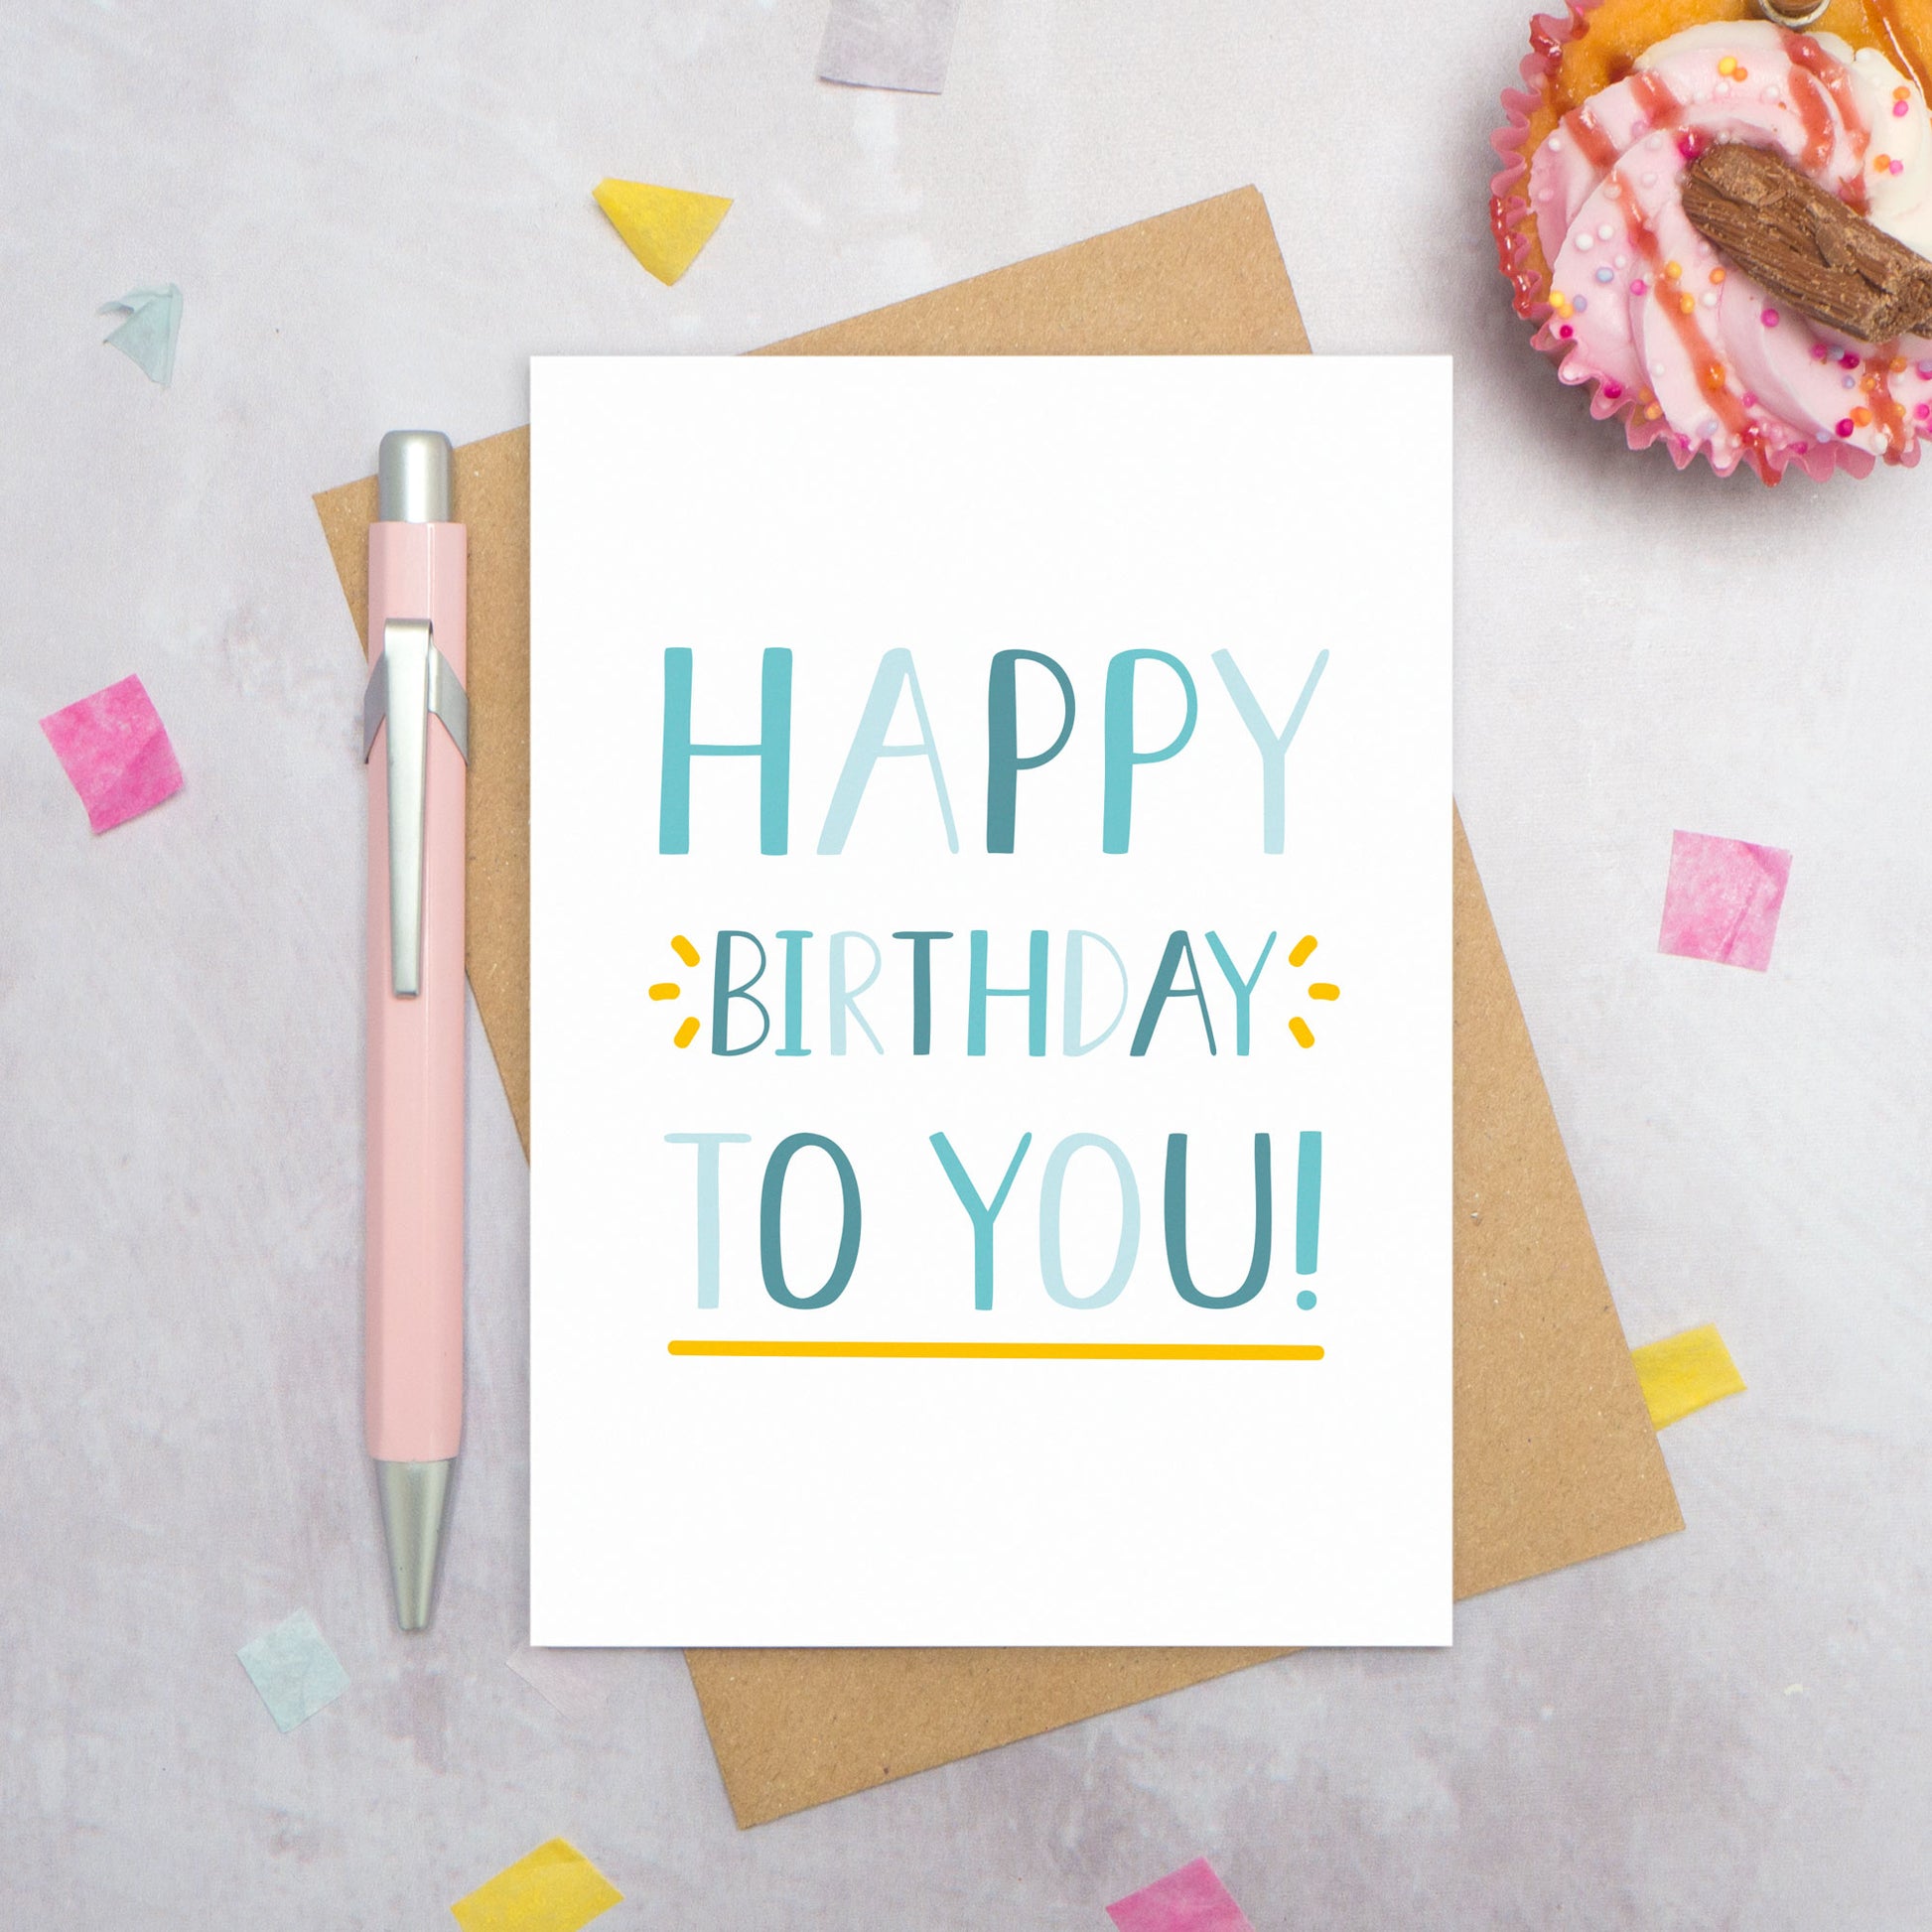 A happy birthday to you card photographed from directly above. The card is lying on its kraft brown envelope which is on a grey surface. There is also a pink pen, confetti and a pink cupcake! This is the blue colour palette!